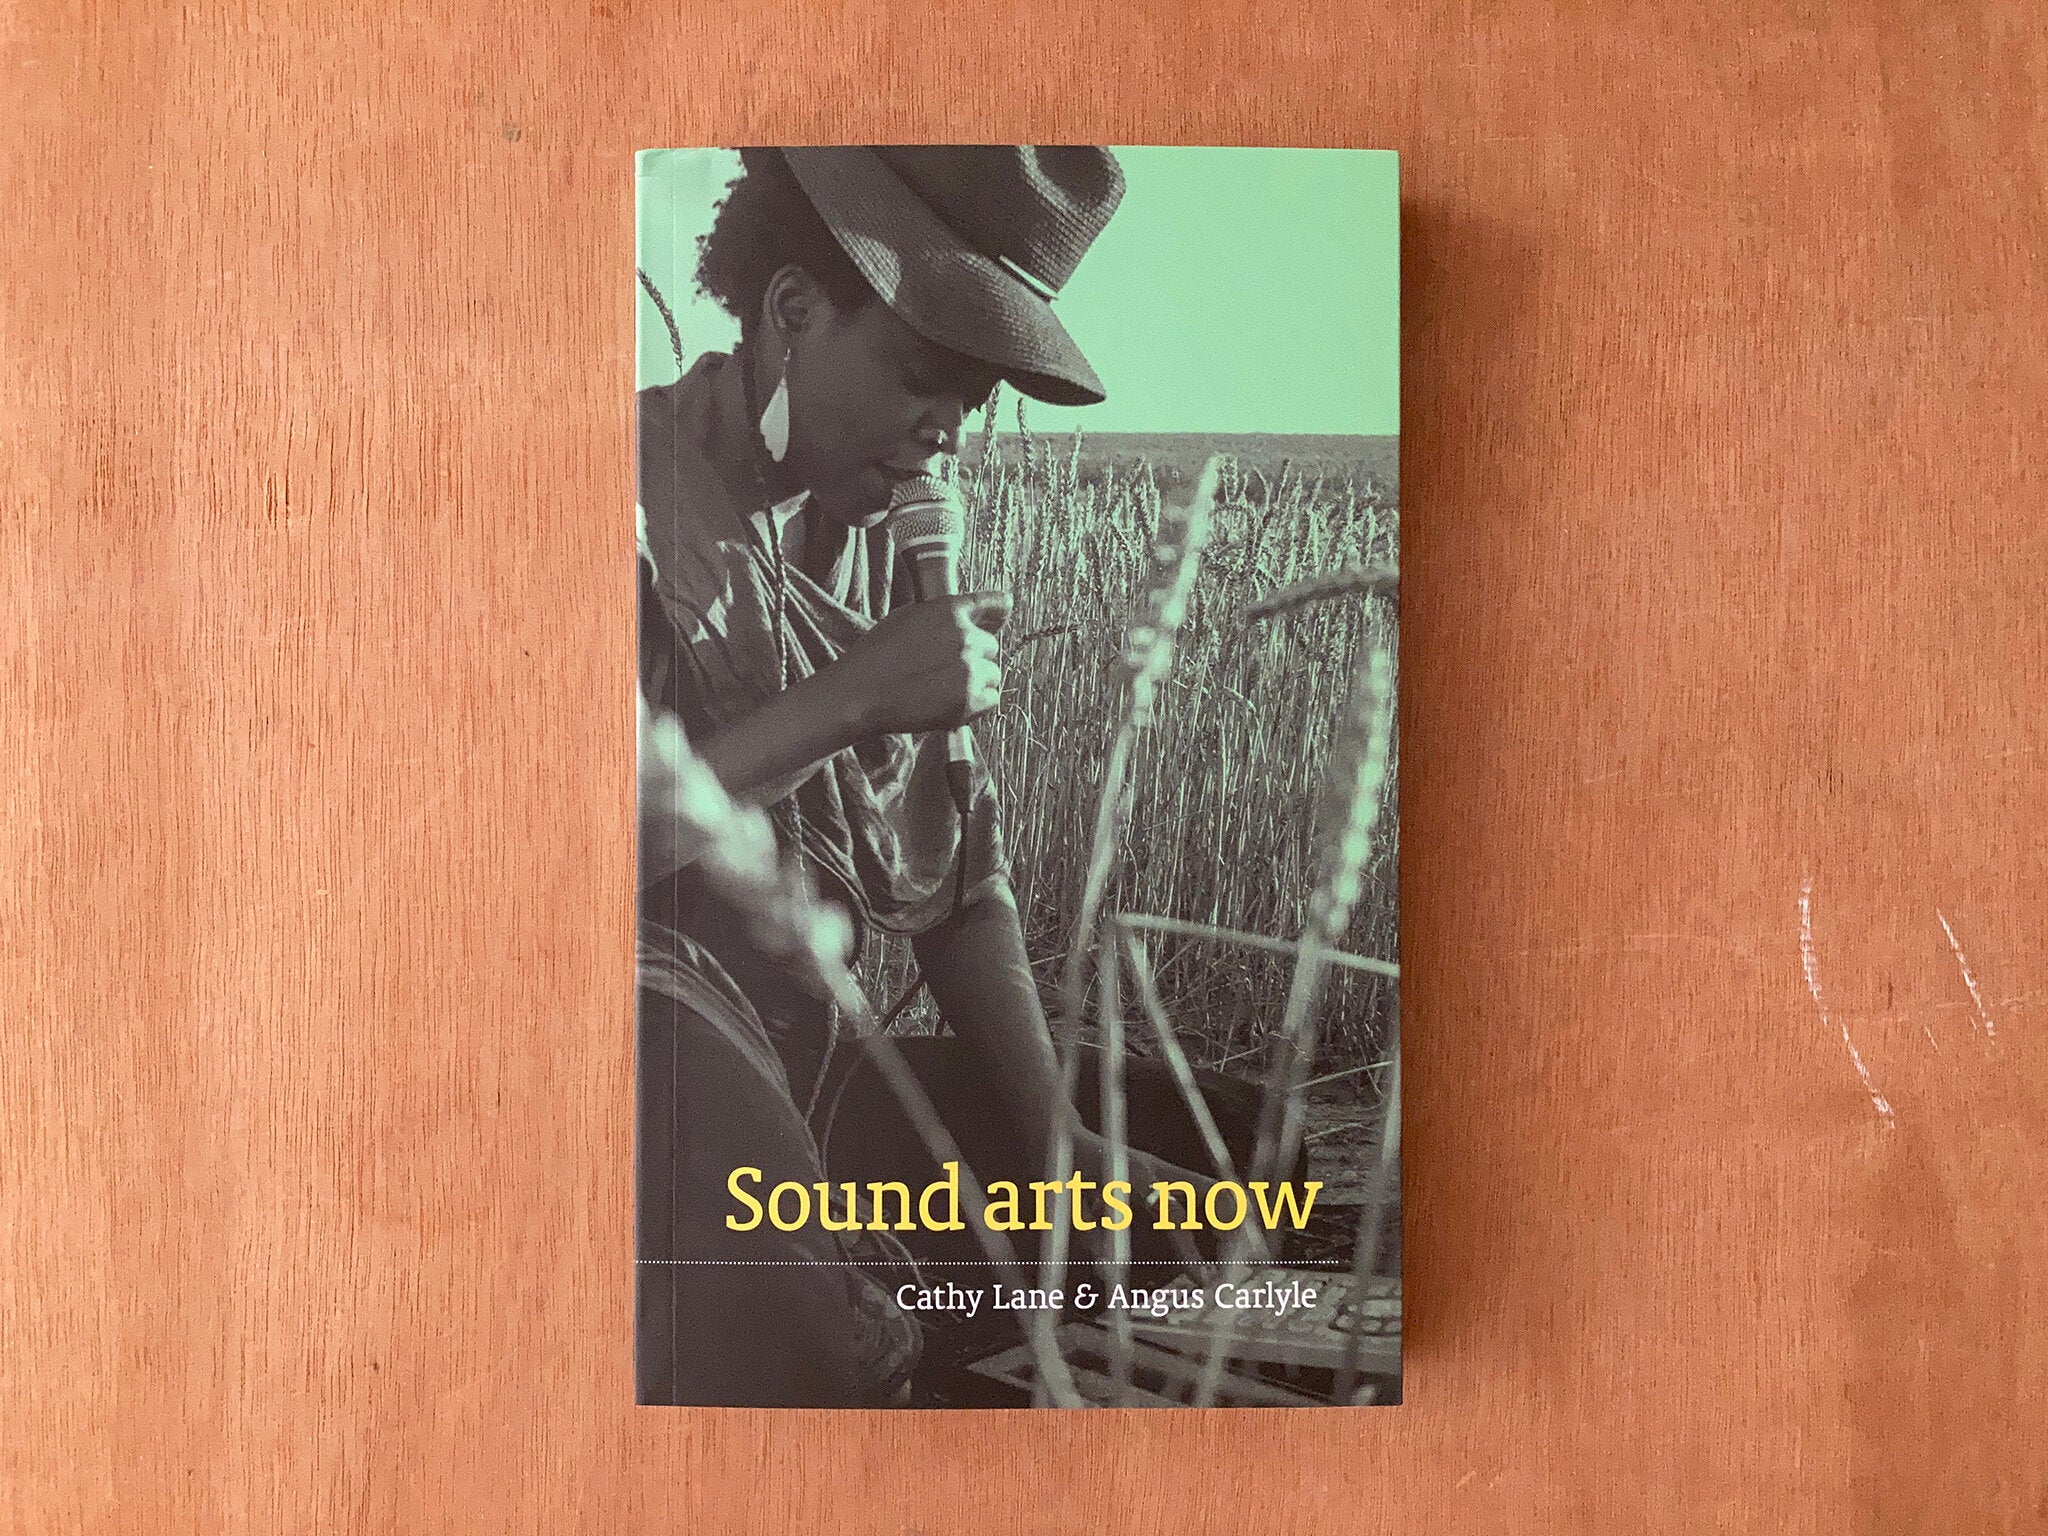 SOUND ARTS NOW by Cathy Lane and Angus Carlyle